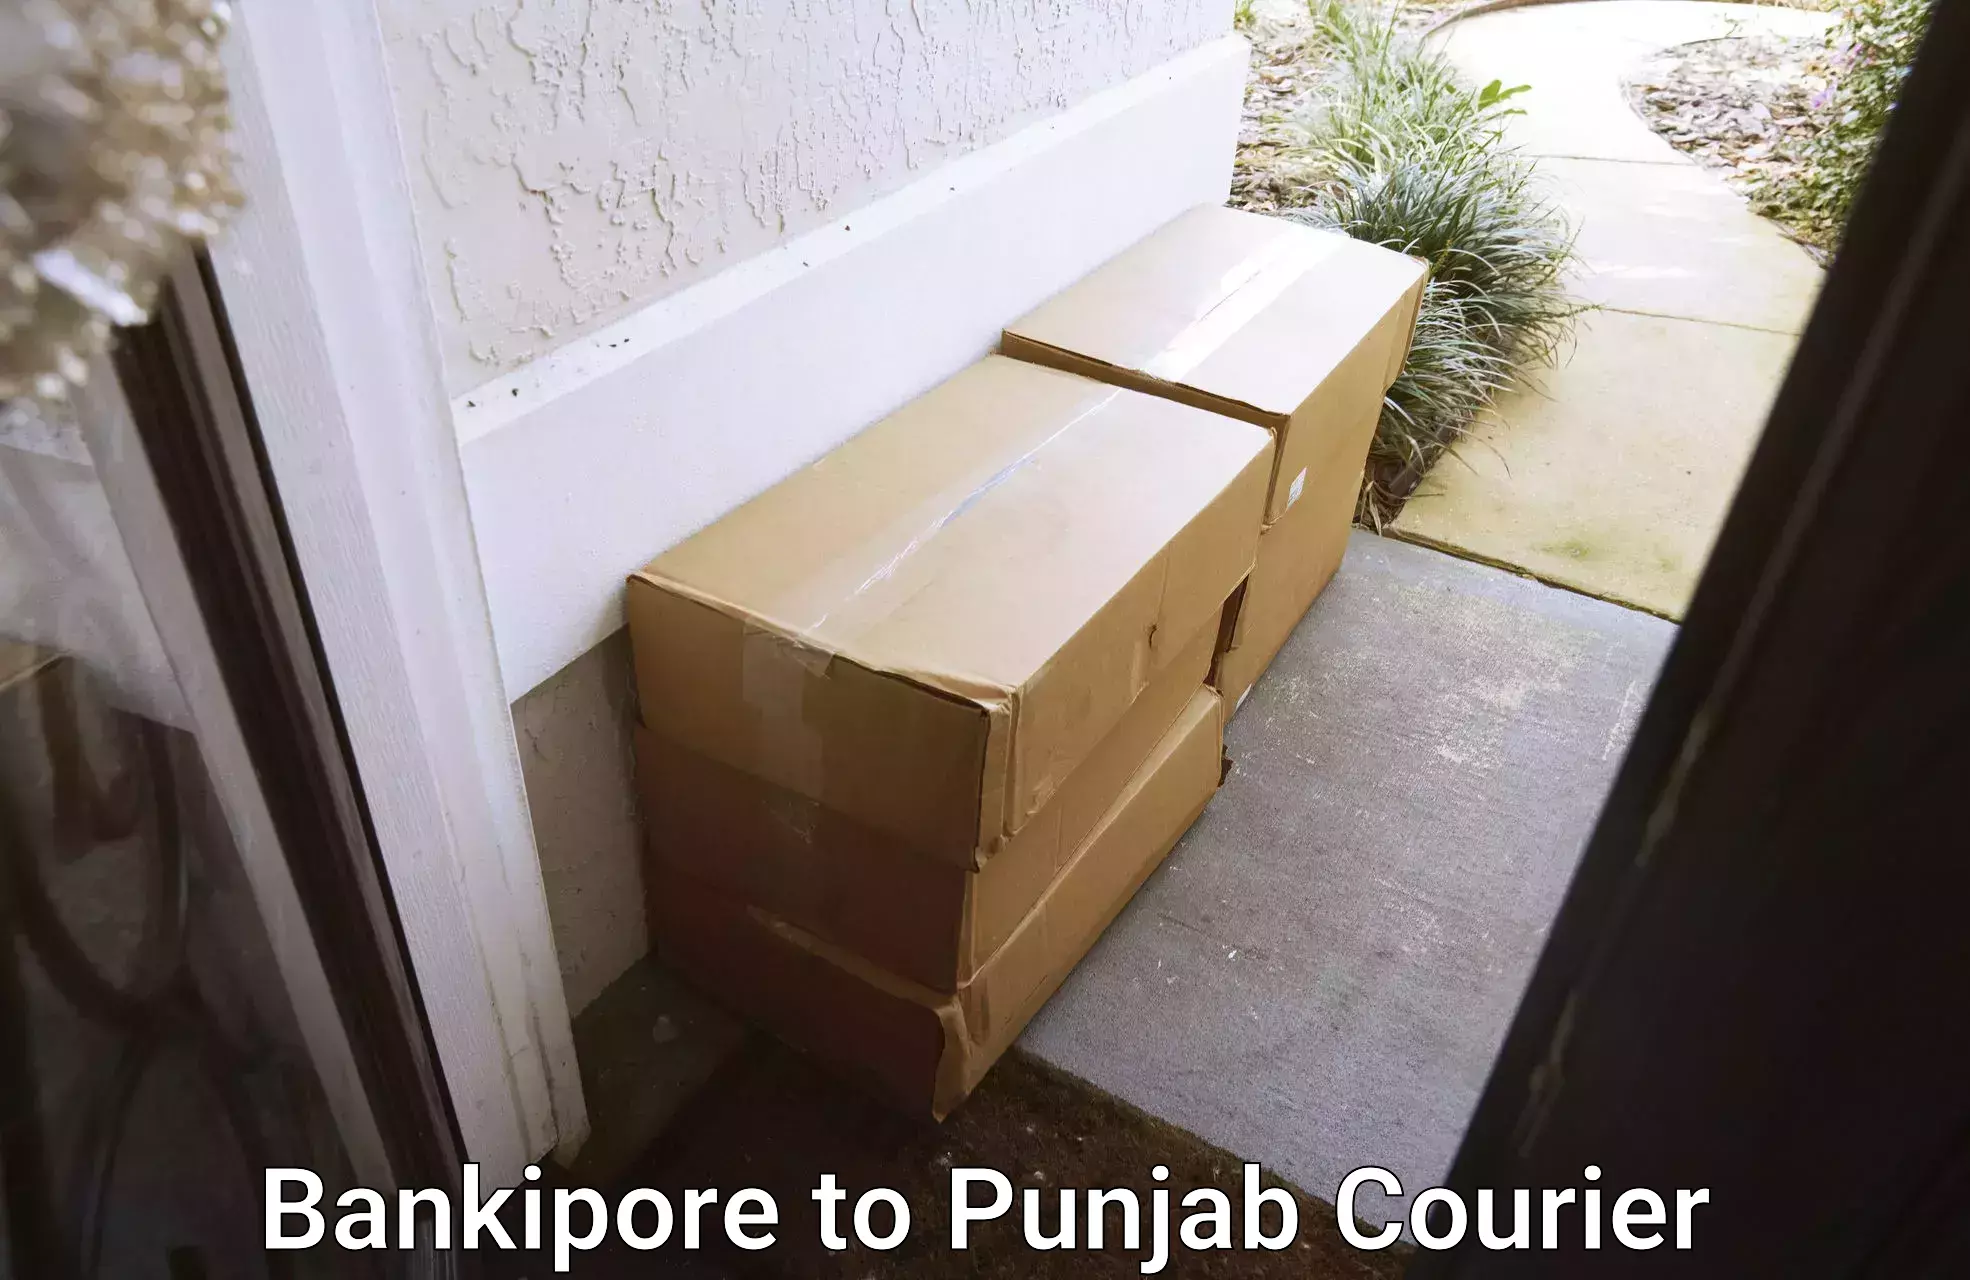 Home relocation experts Bankipore to Fatehgarh Sahib